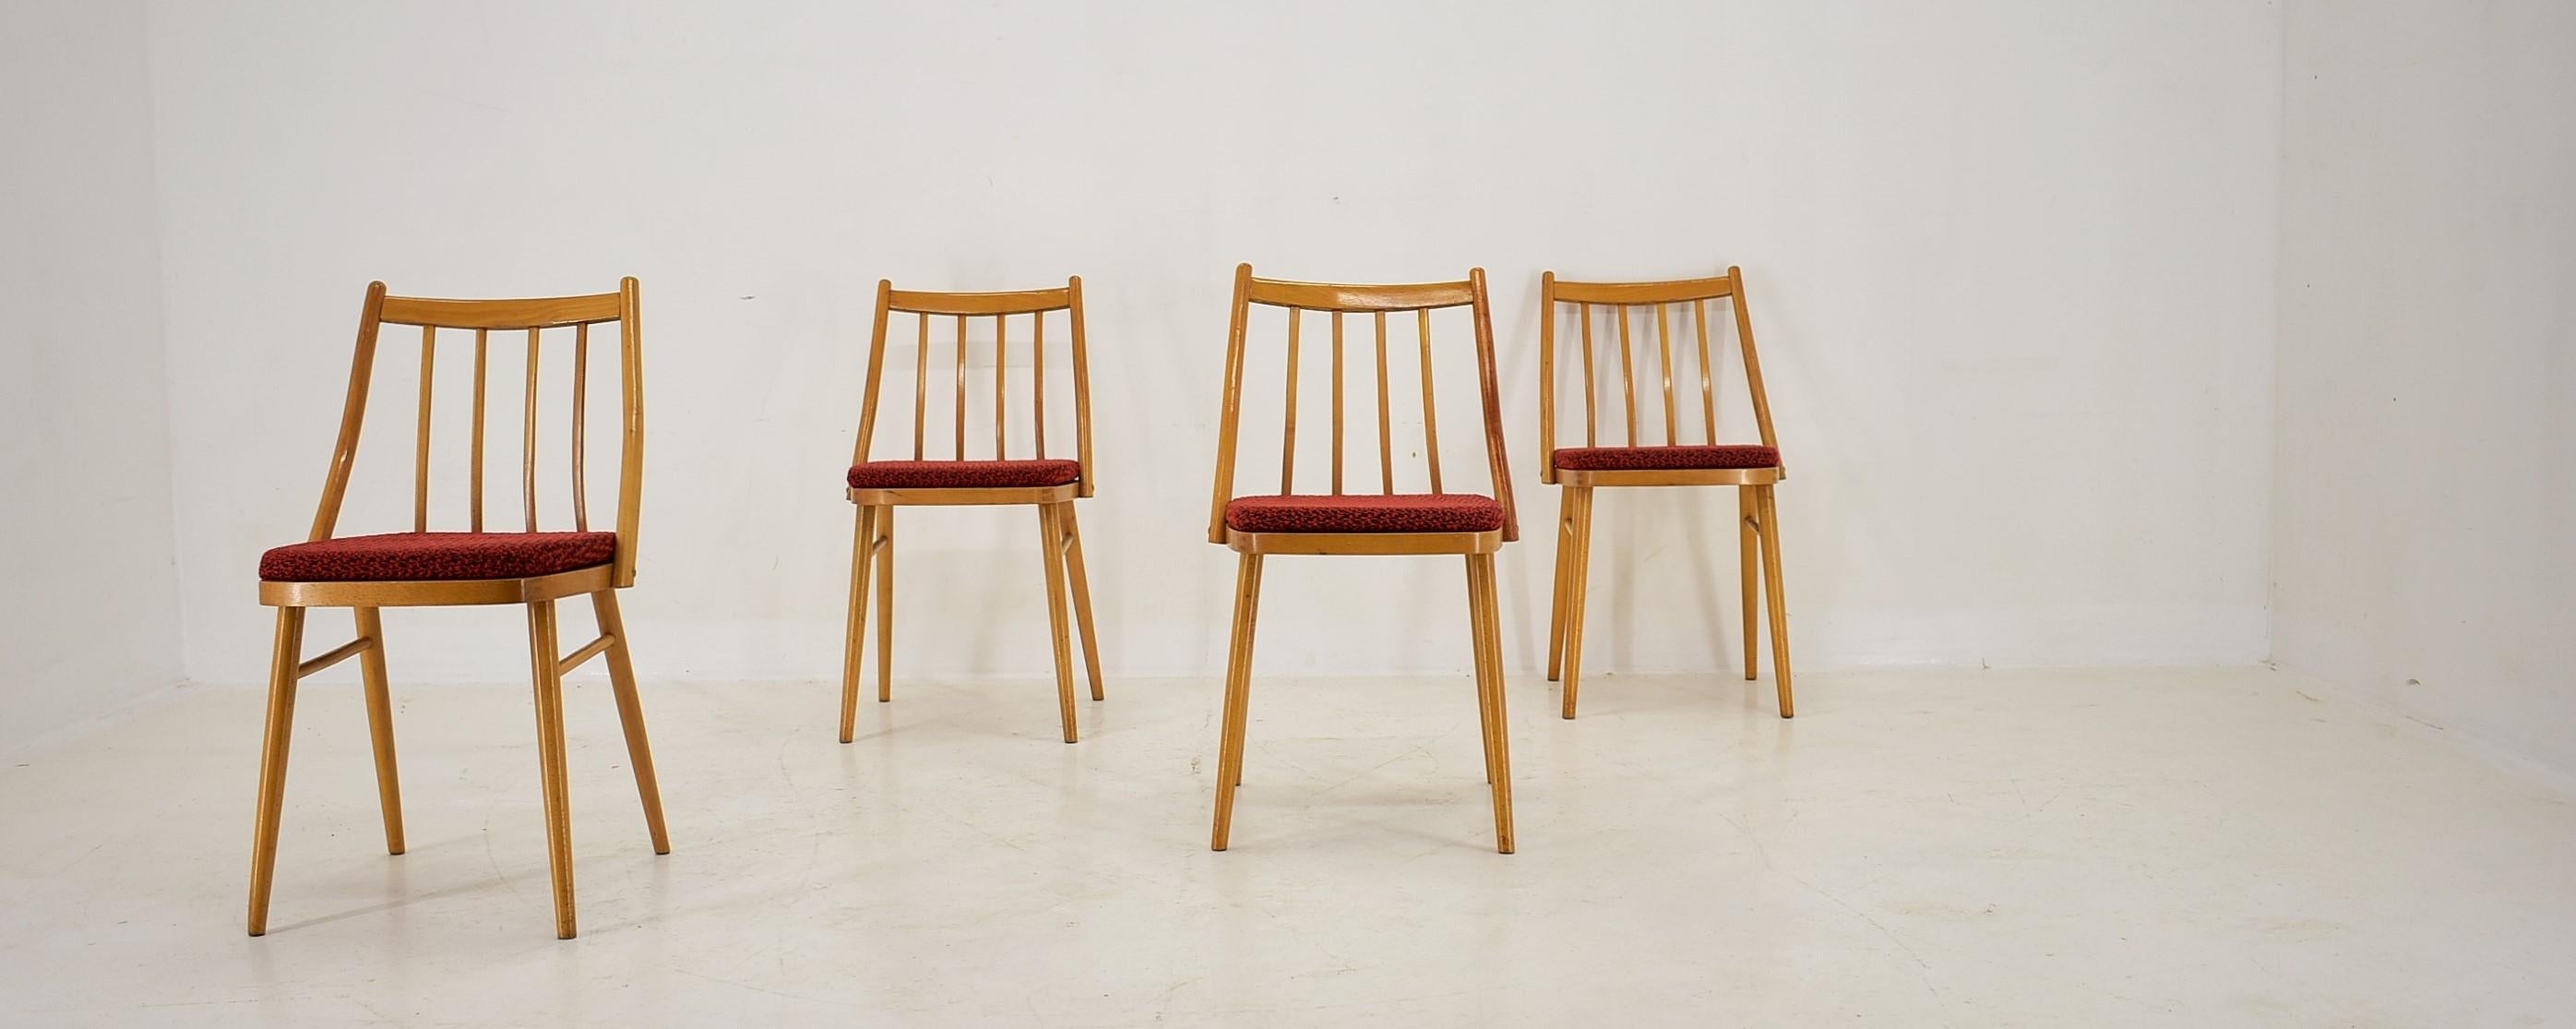 1960s Antonin Suman Beech Dining Chairs, Set of 4 For Sale 7